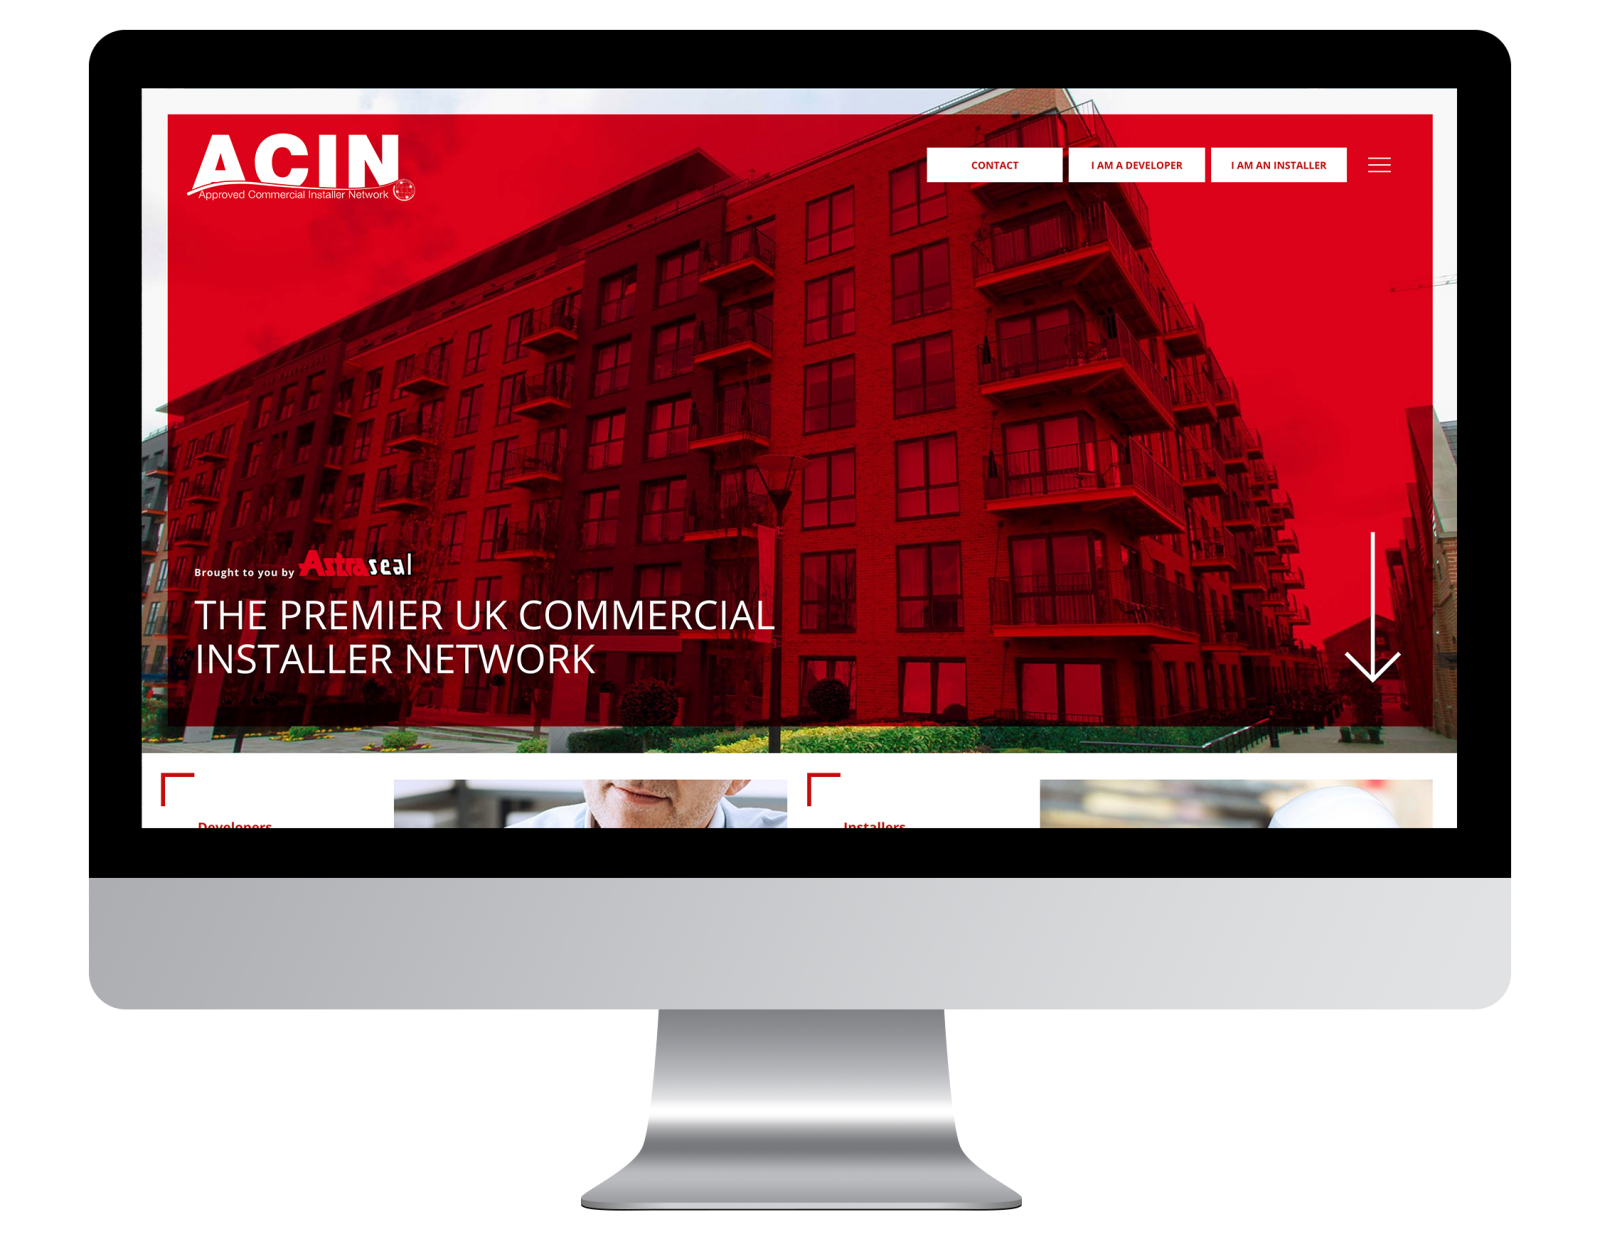 Wellingborough-based fabricator Astraseal are proud to announce the launch of the G17 nominated Approved Commercial Installer Network (ACIN) website..